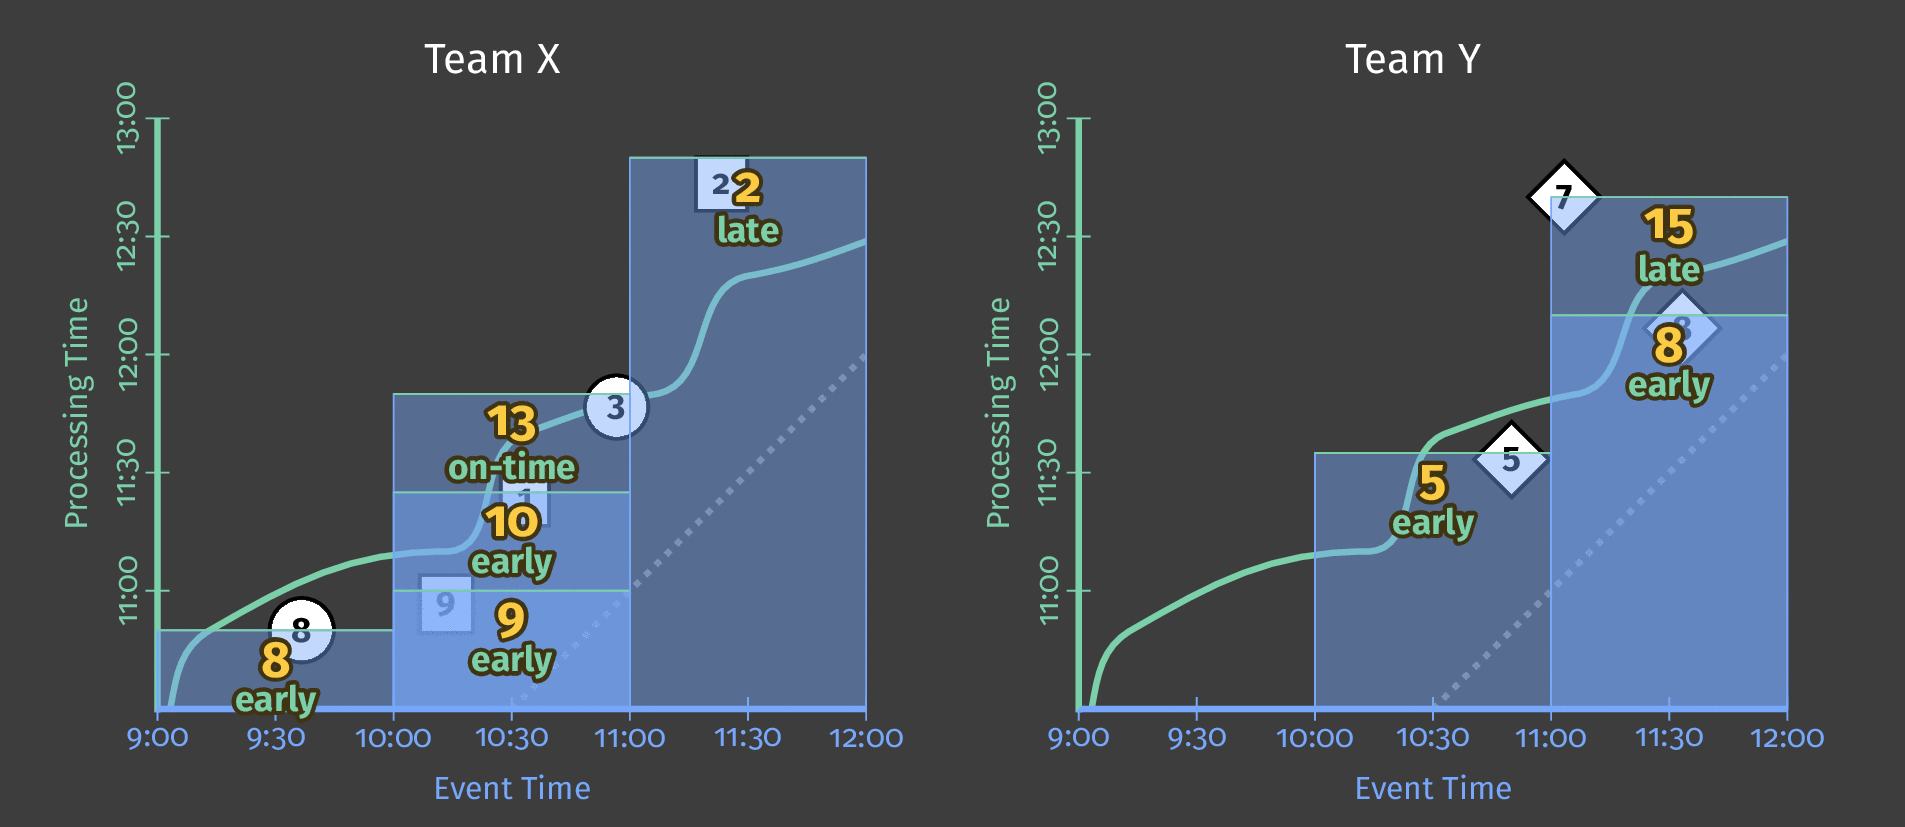 A pipeline processes score data by team, windowed by event time.